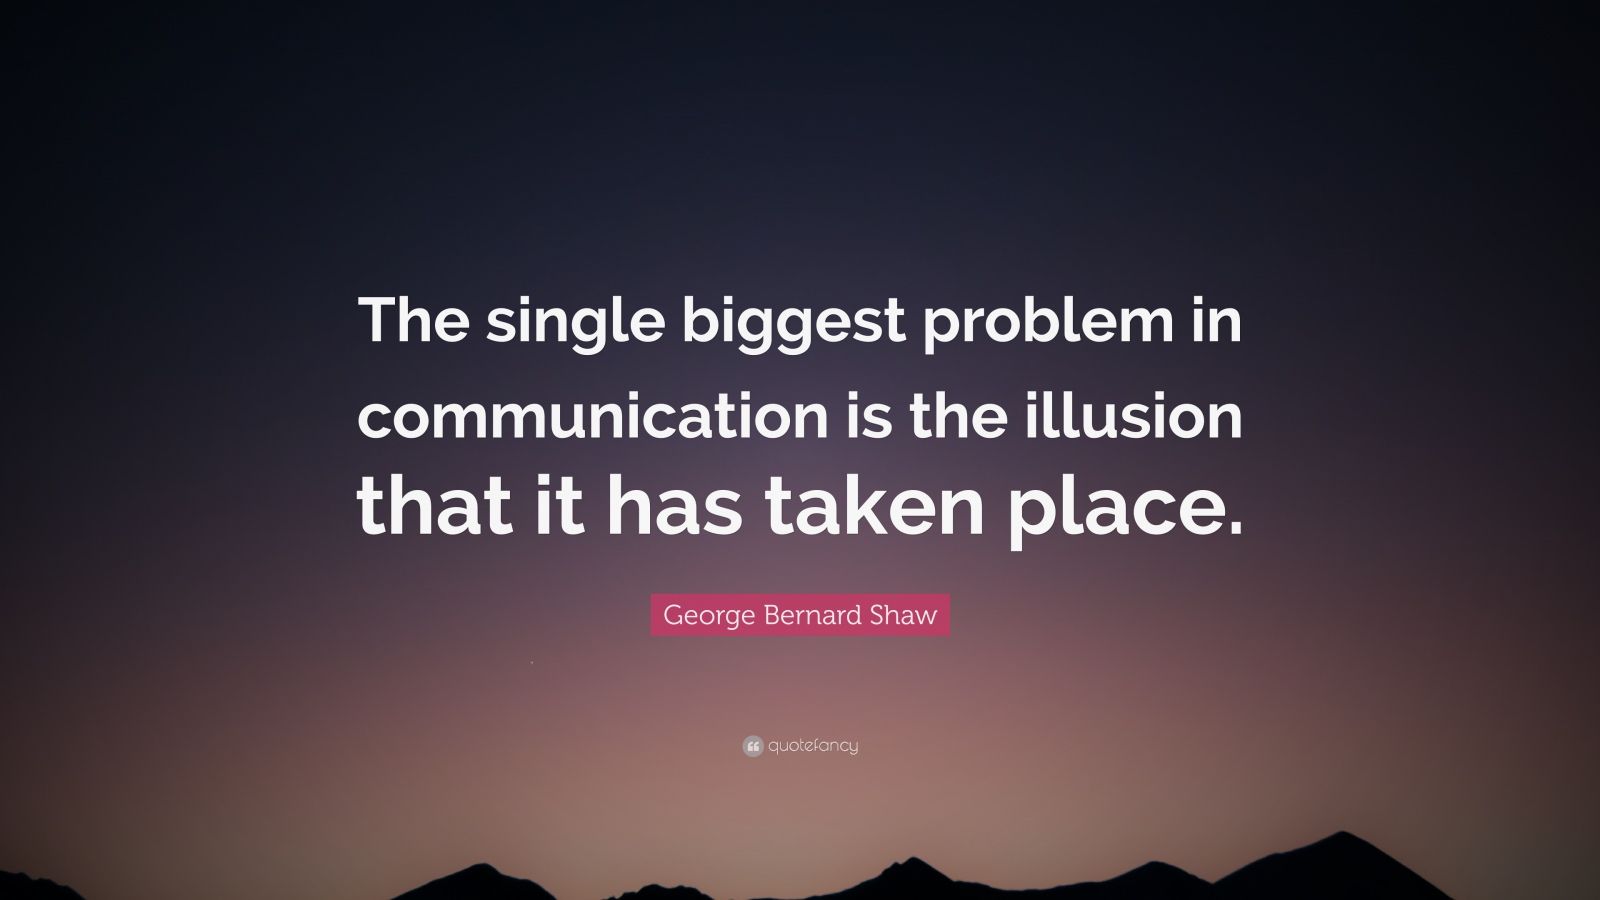 George Bernard Shaw Quote: “The single biggest problem in communication ...